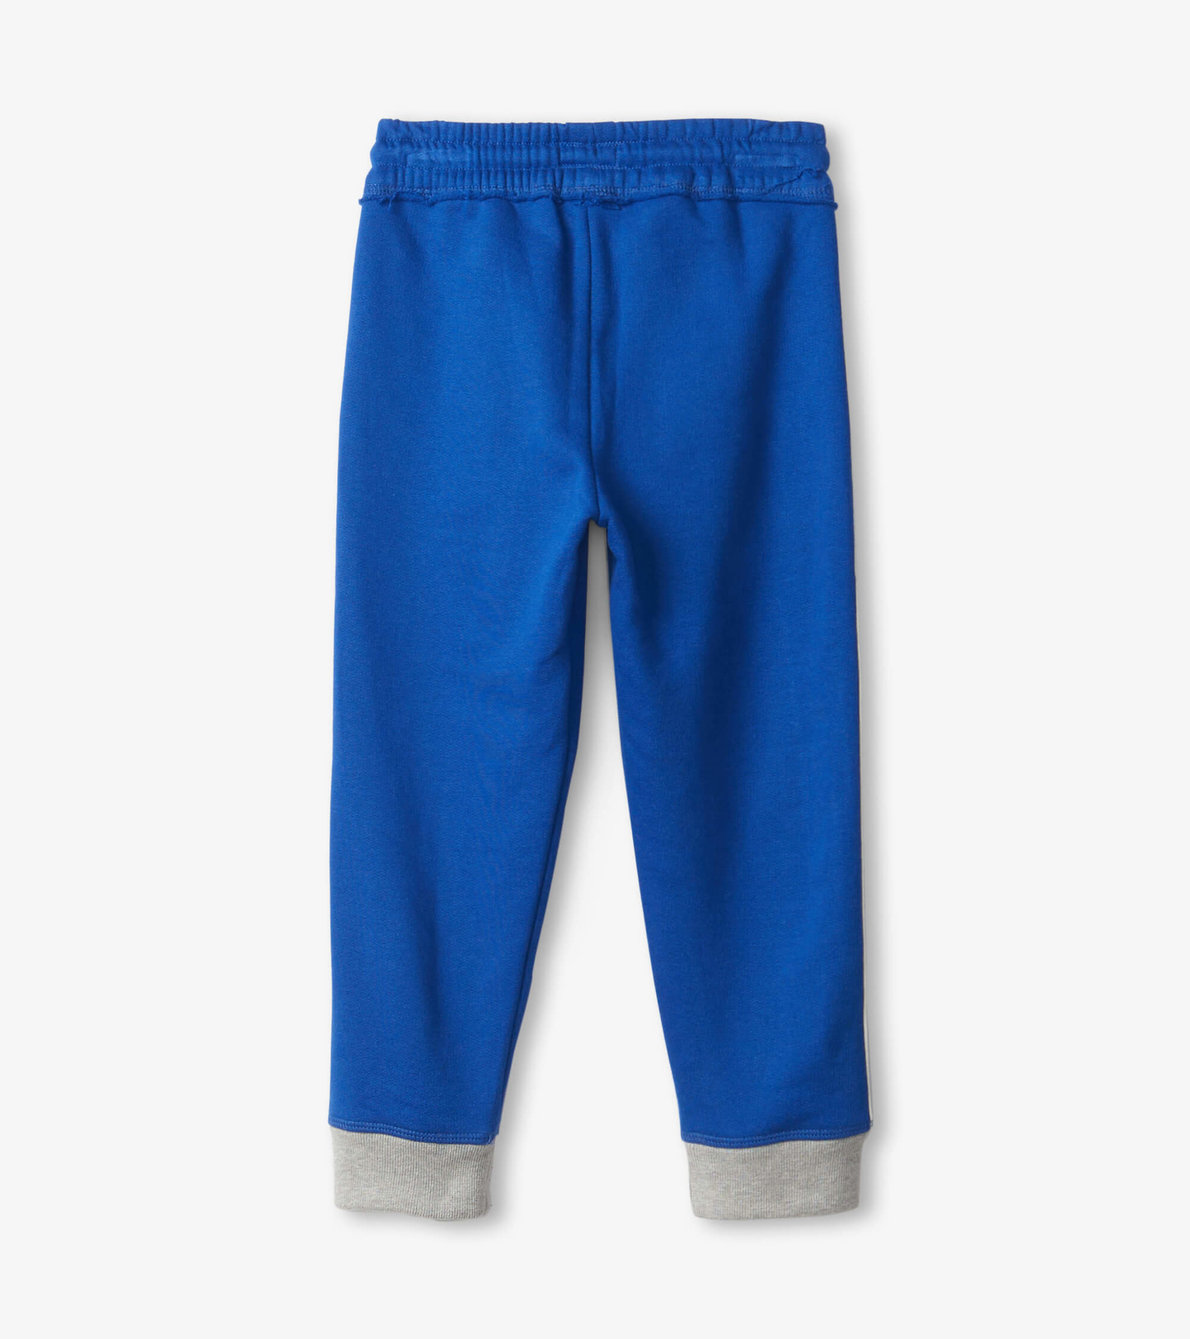 View larger image of Boys Blue Terry Joggers